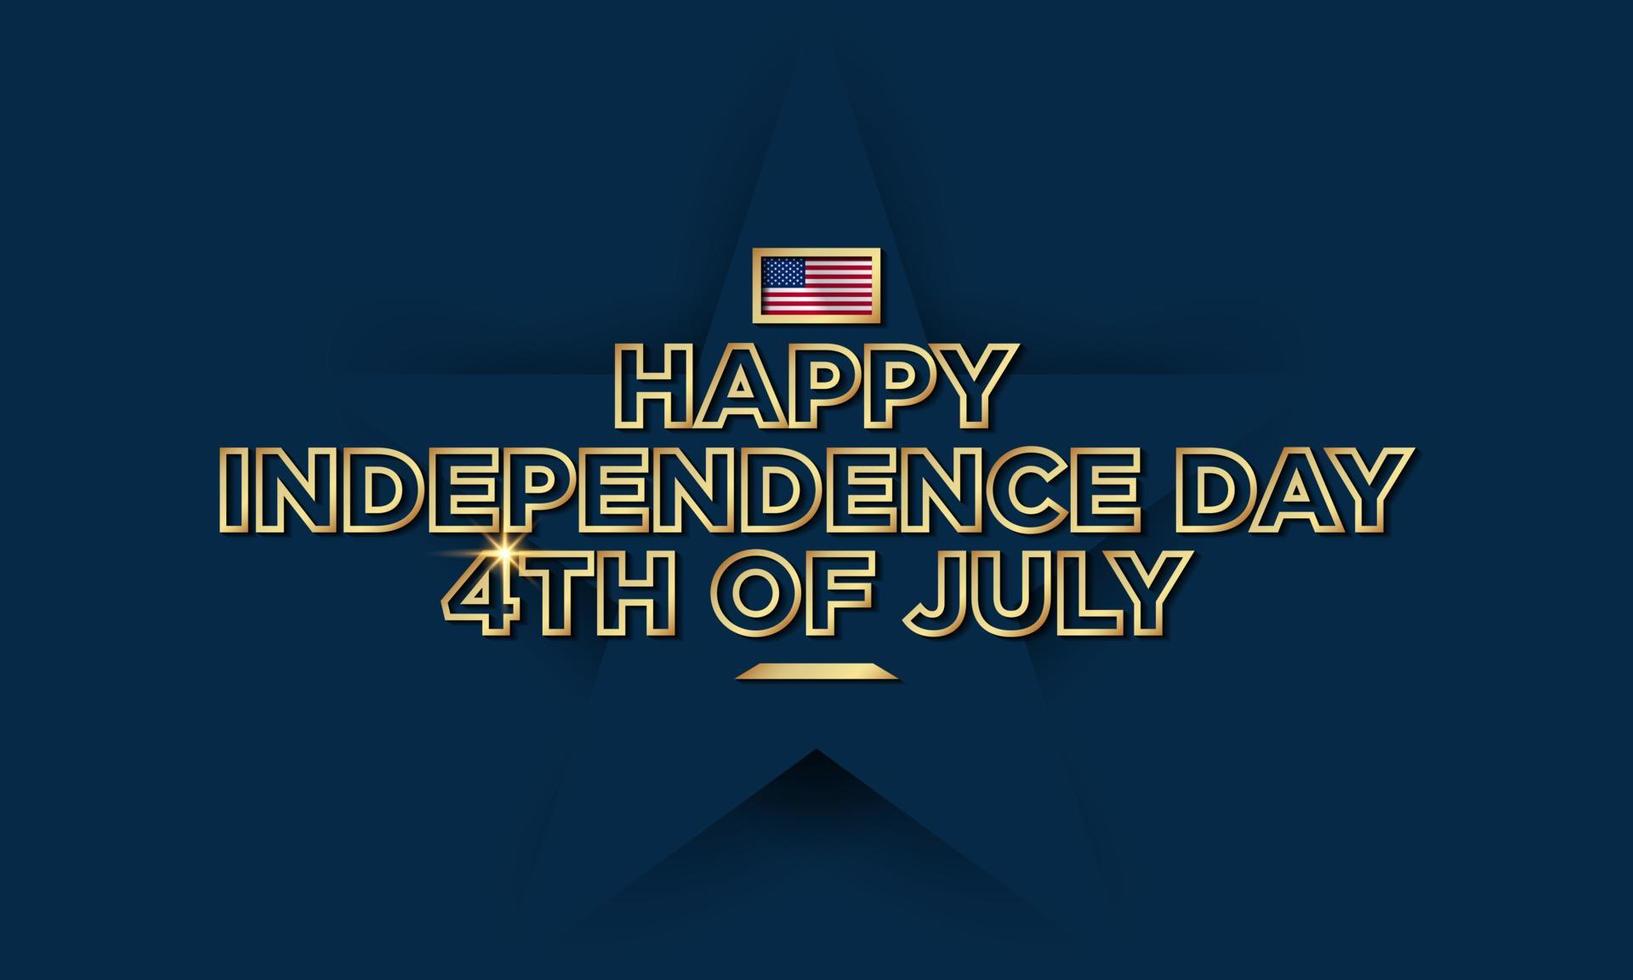 United States Independence Day Background Design. Fourth of July. vector